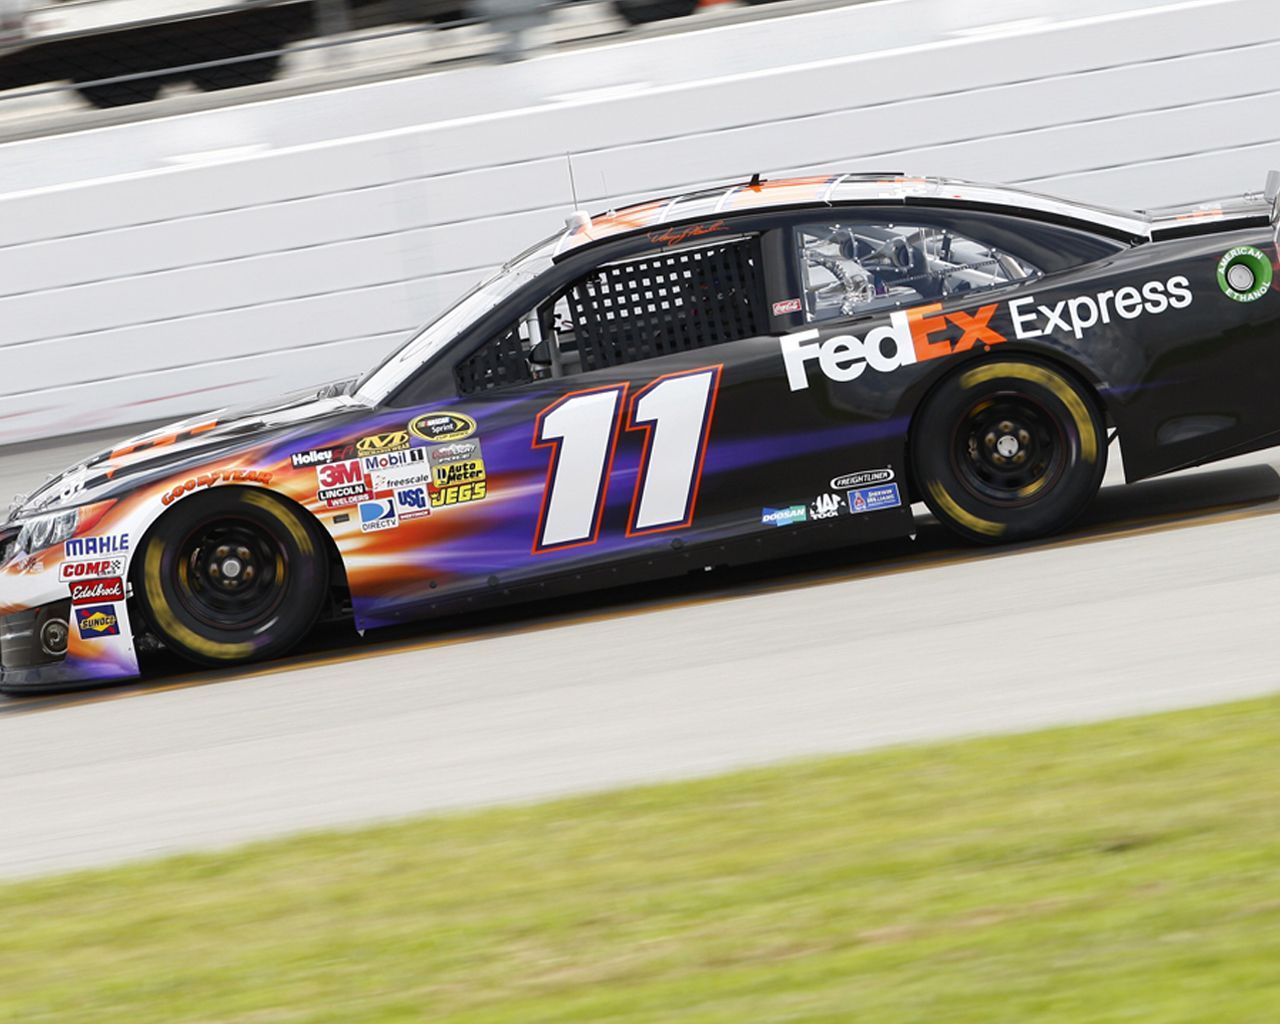 Hey #Denny Hamlin fans here to download a wallpaper